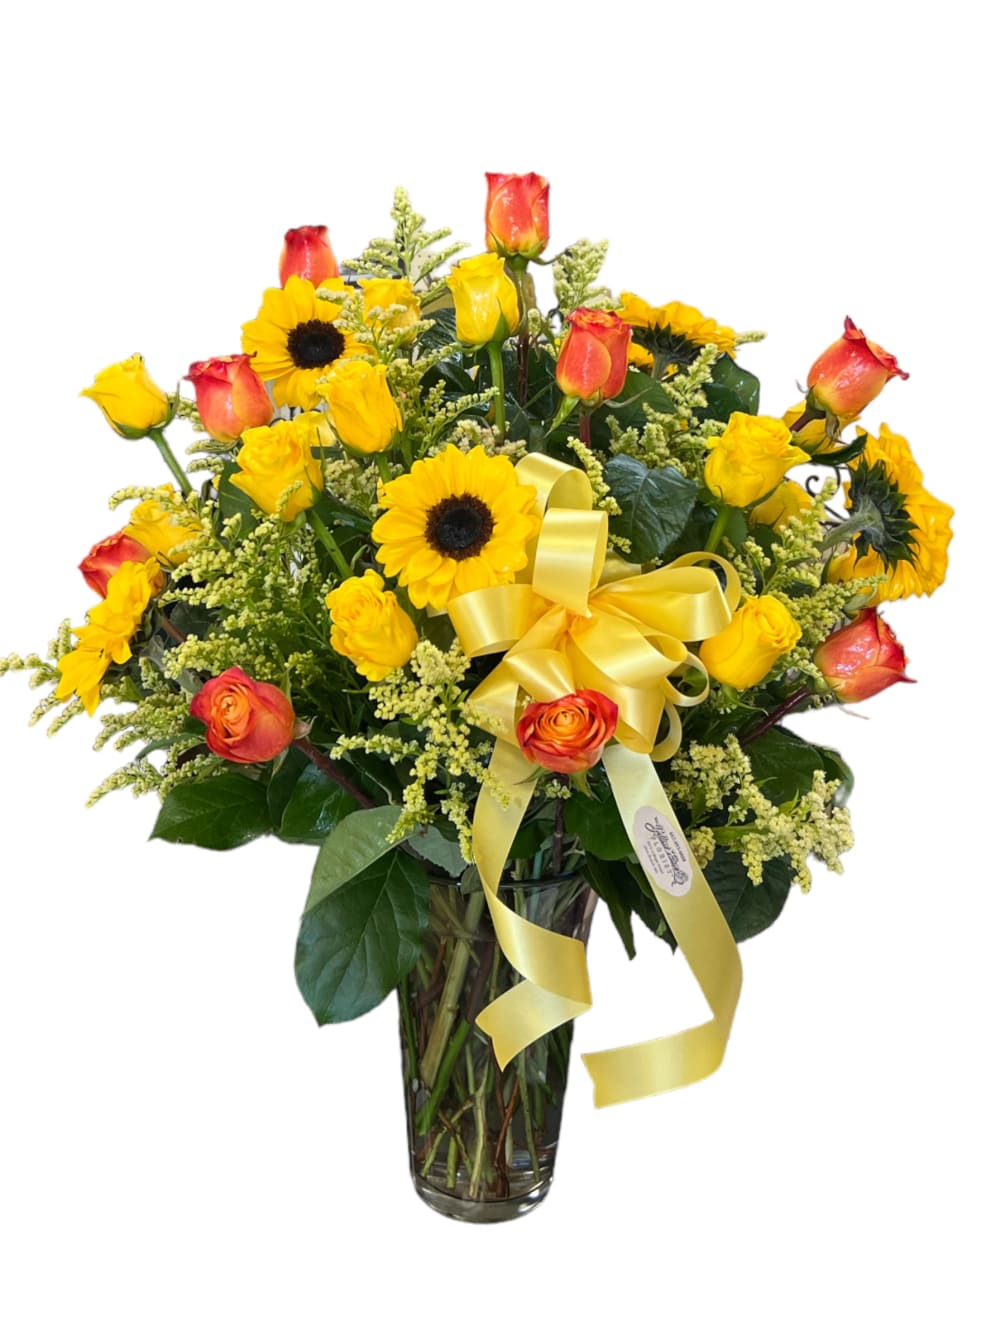 This arrangement is sure to brighten someone&rsquo;s day. Designed in a large